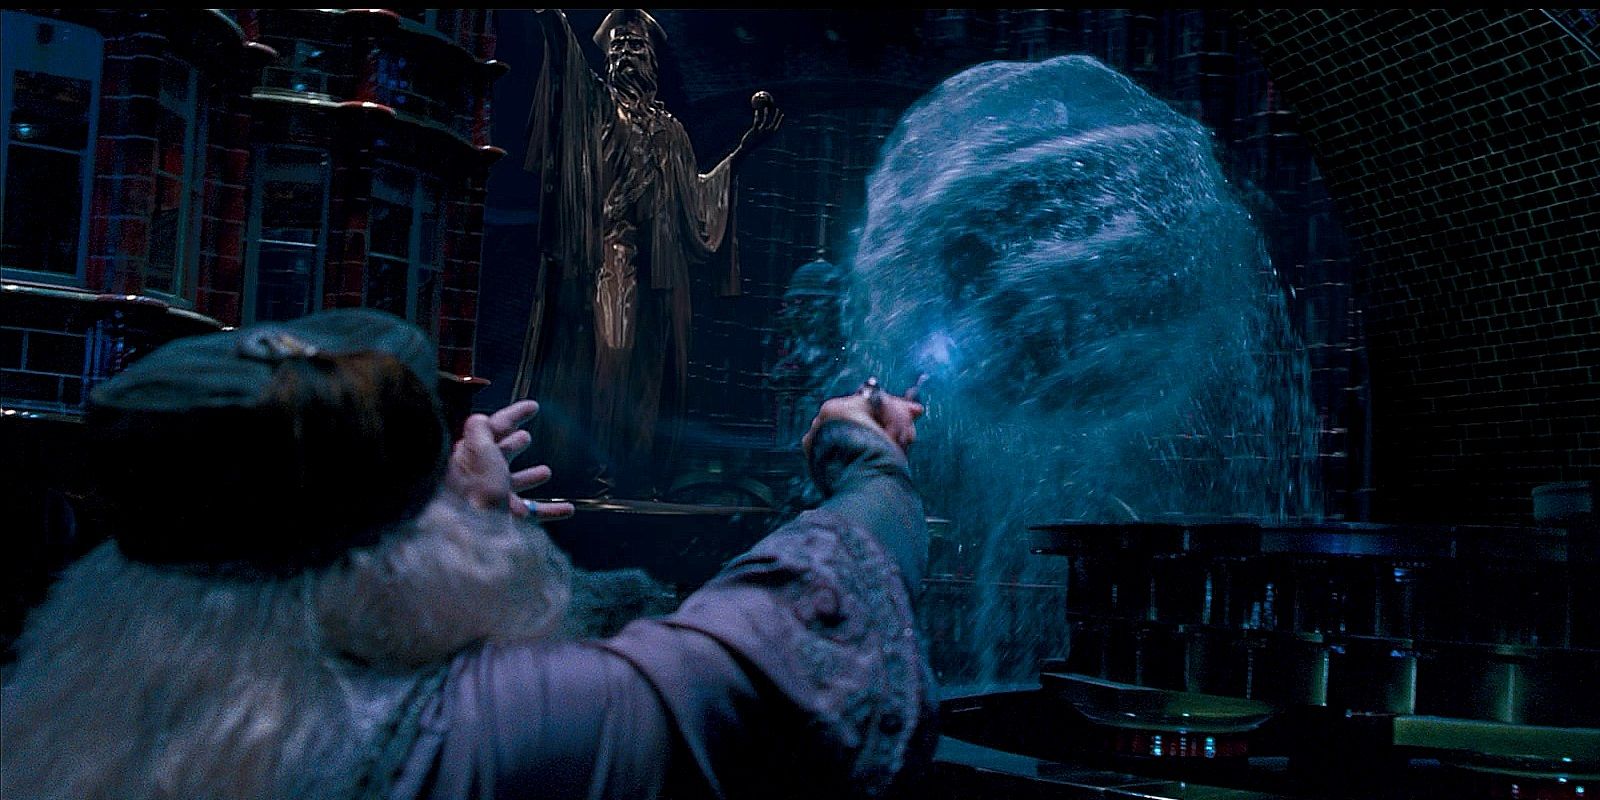 Dumbledore battles Voldemort and uses a water manipulation spell in Harry Potter